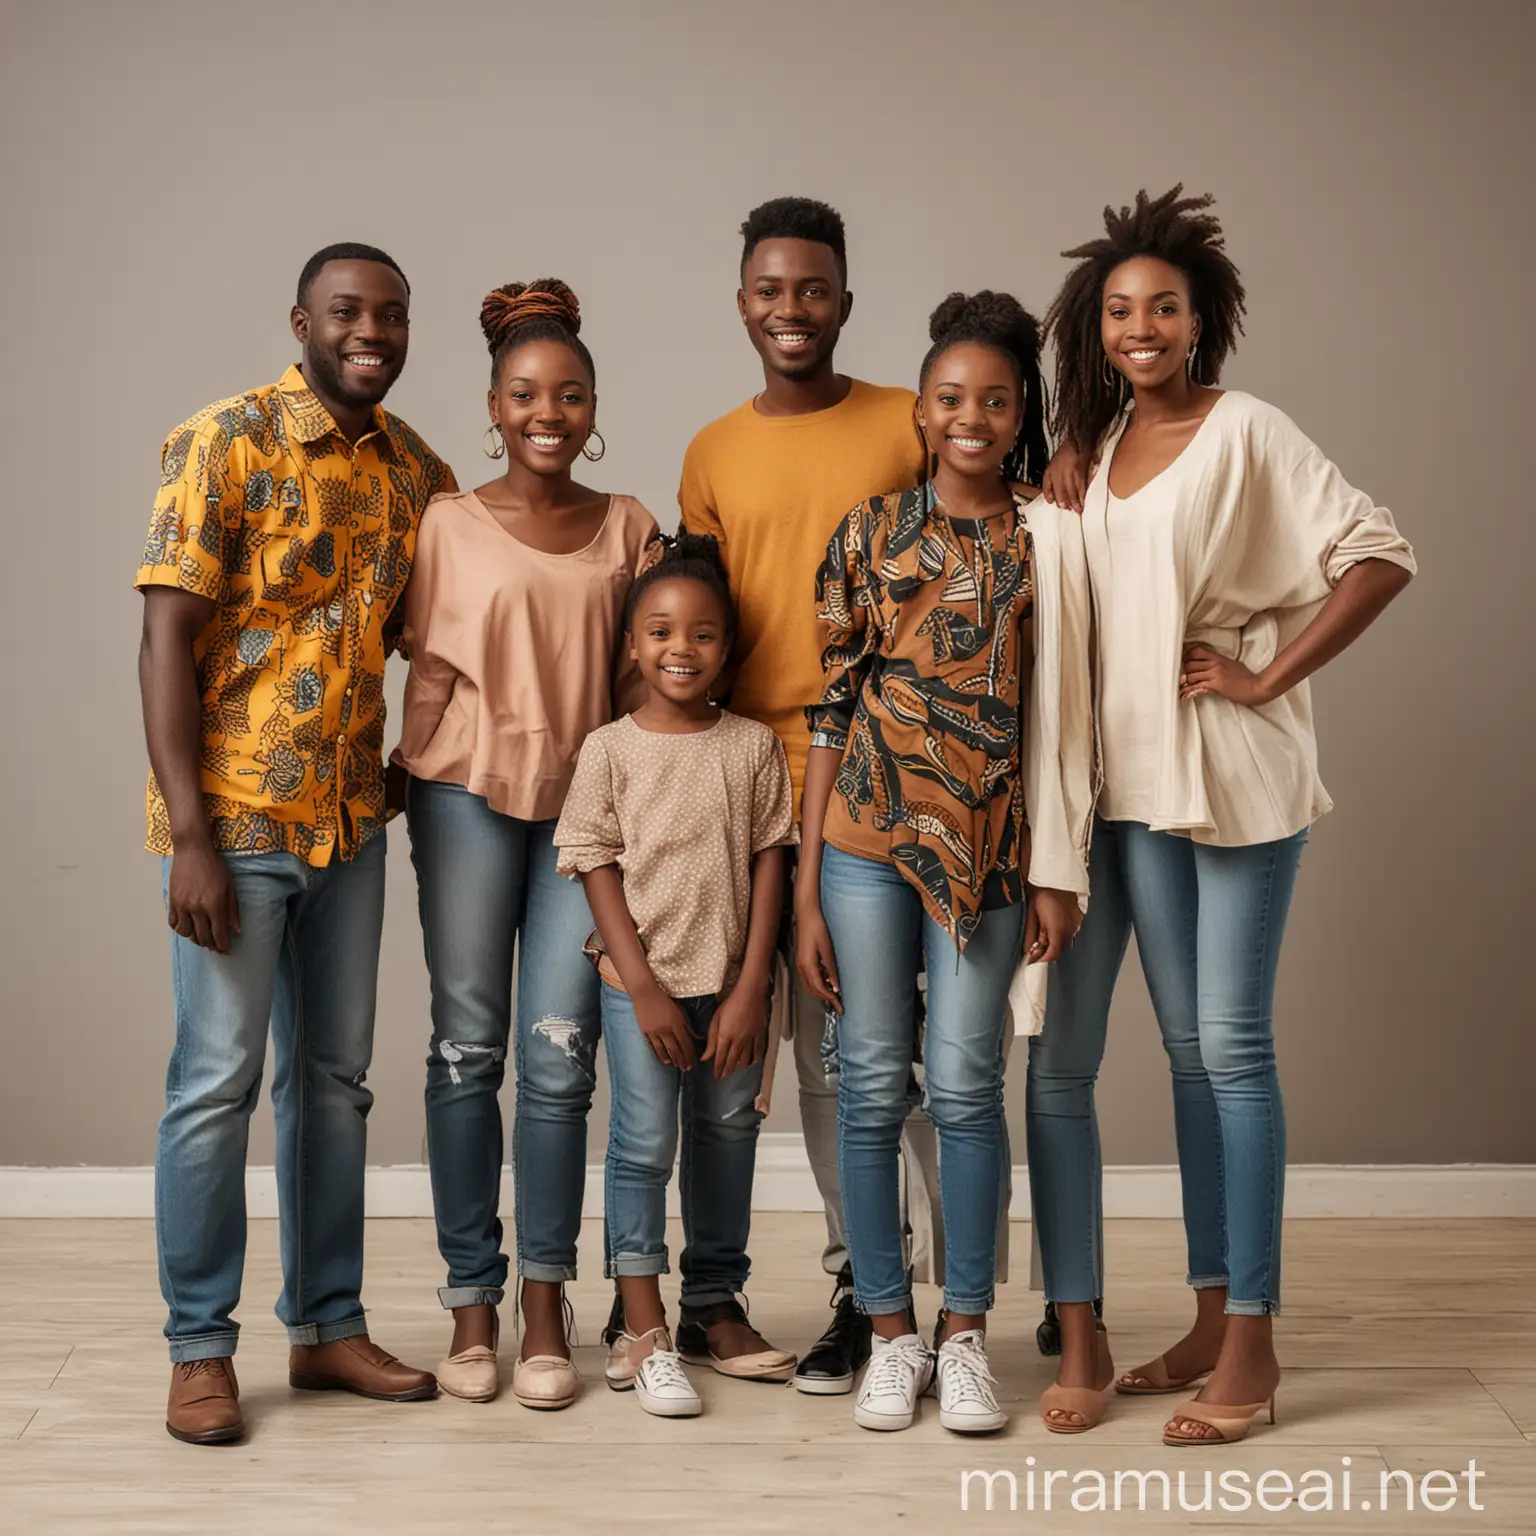 Modern African Family and Friends Standing Together